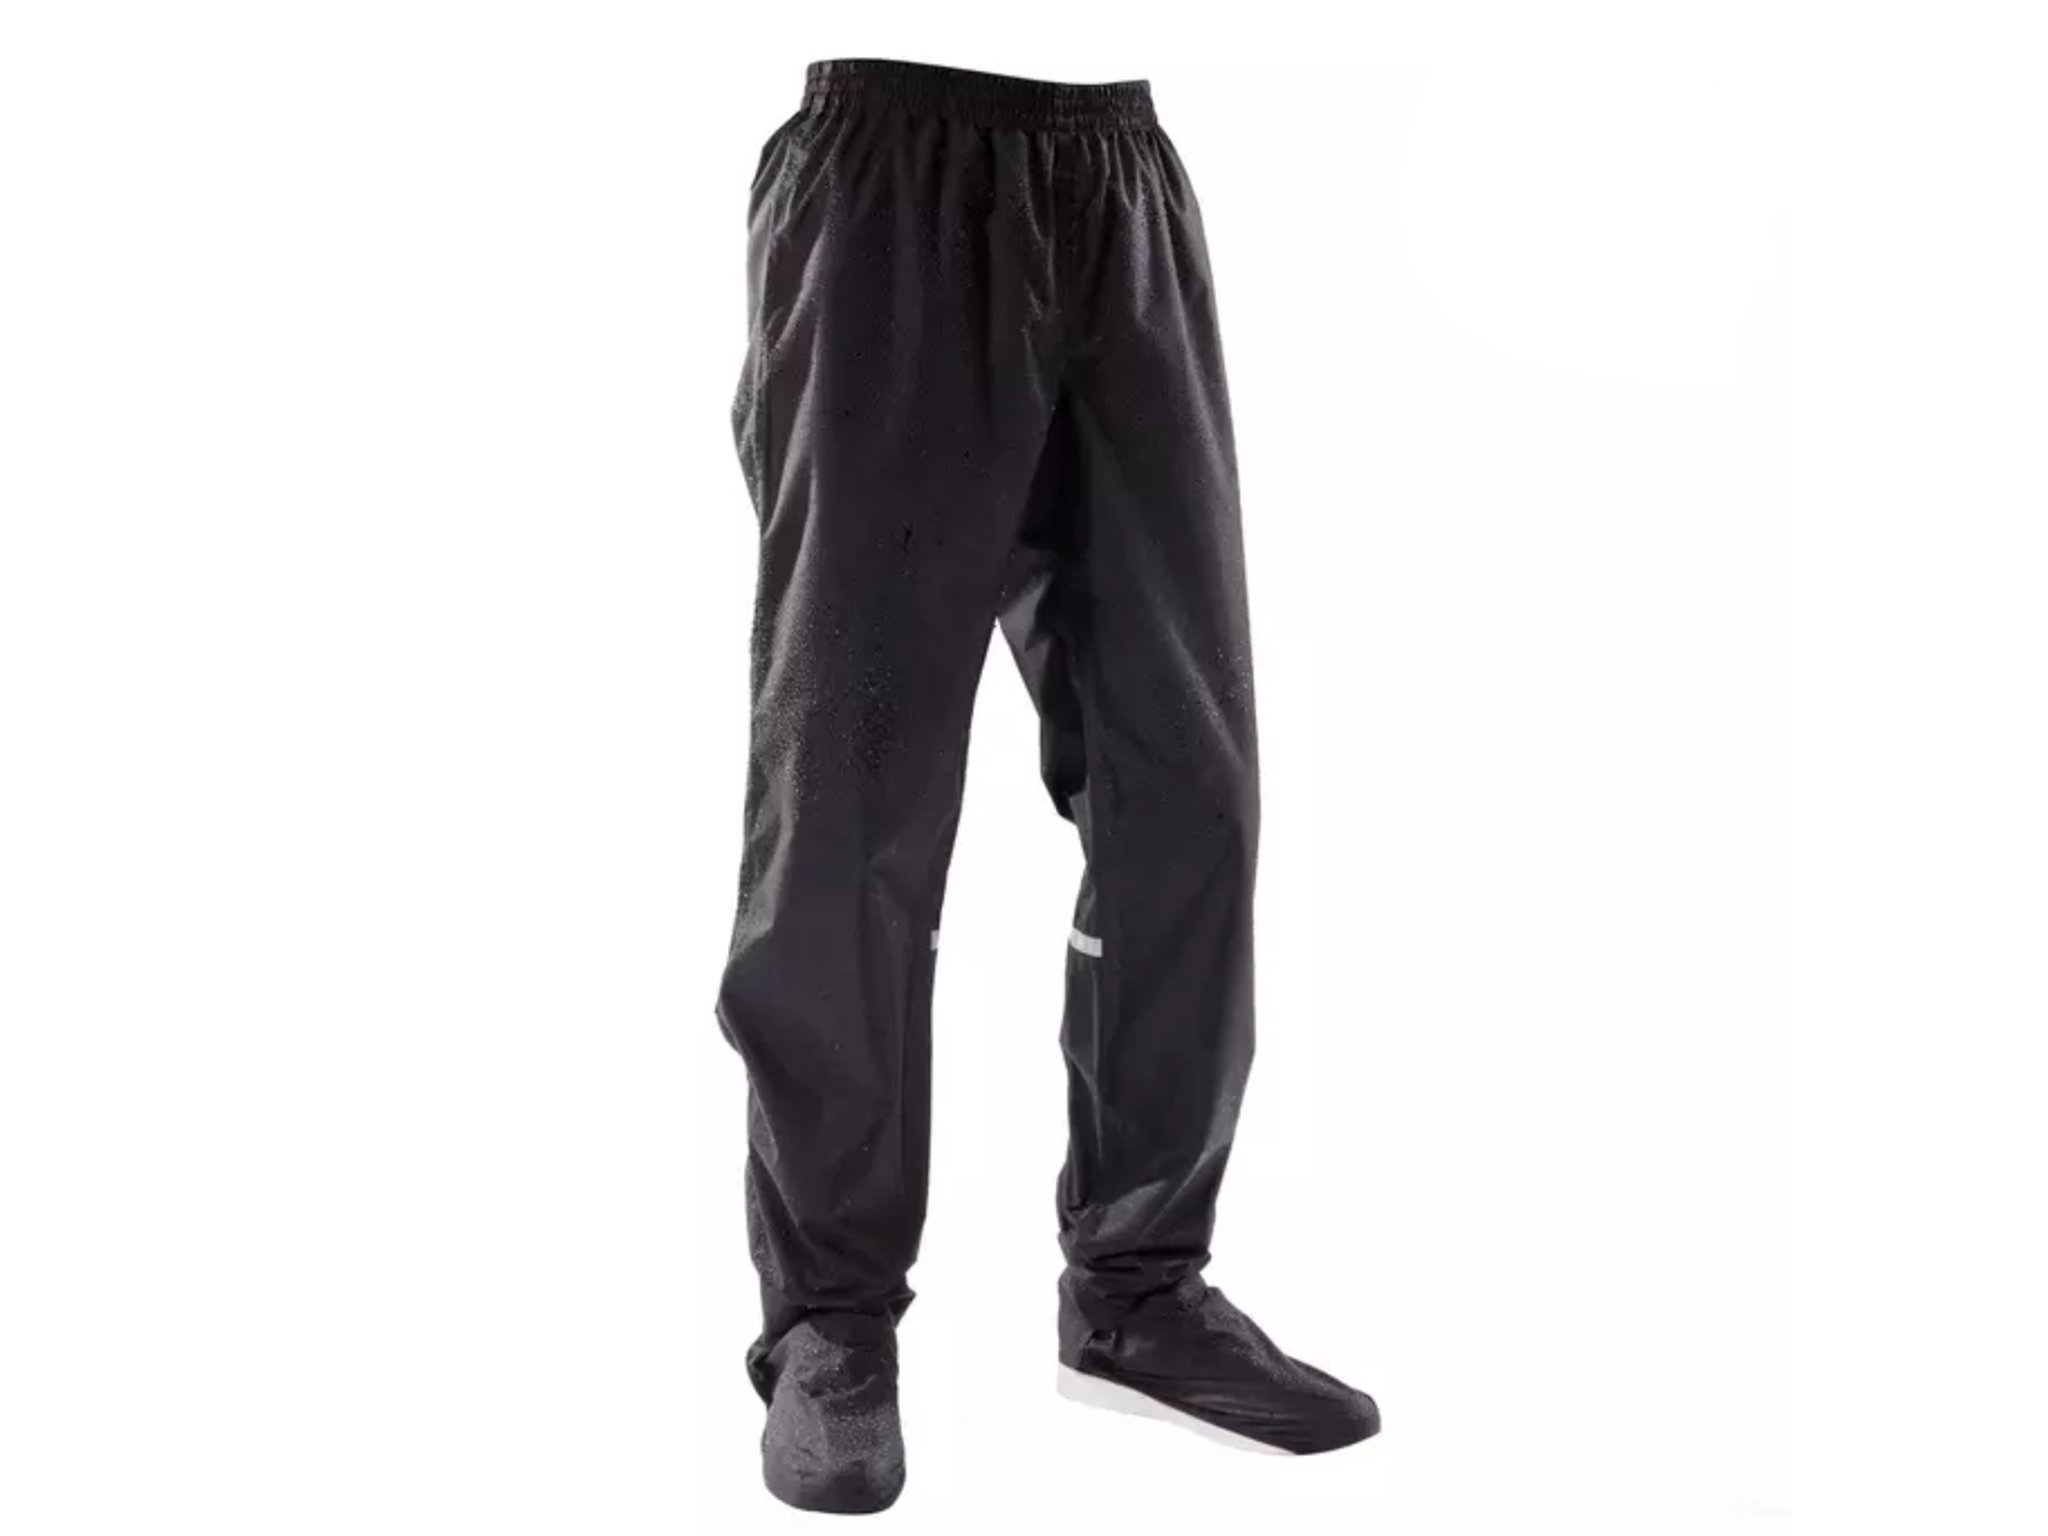 Decathlon Quechua Men's Waterproof Hiking Overtrousers NH500 Imper | Shopee  Philippines